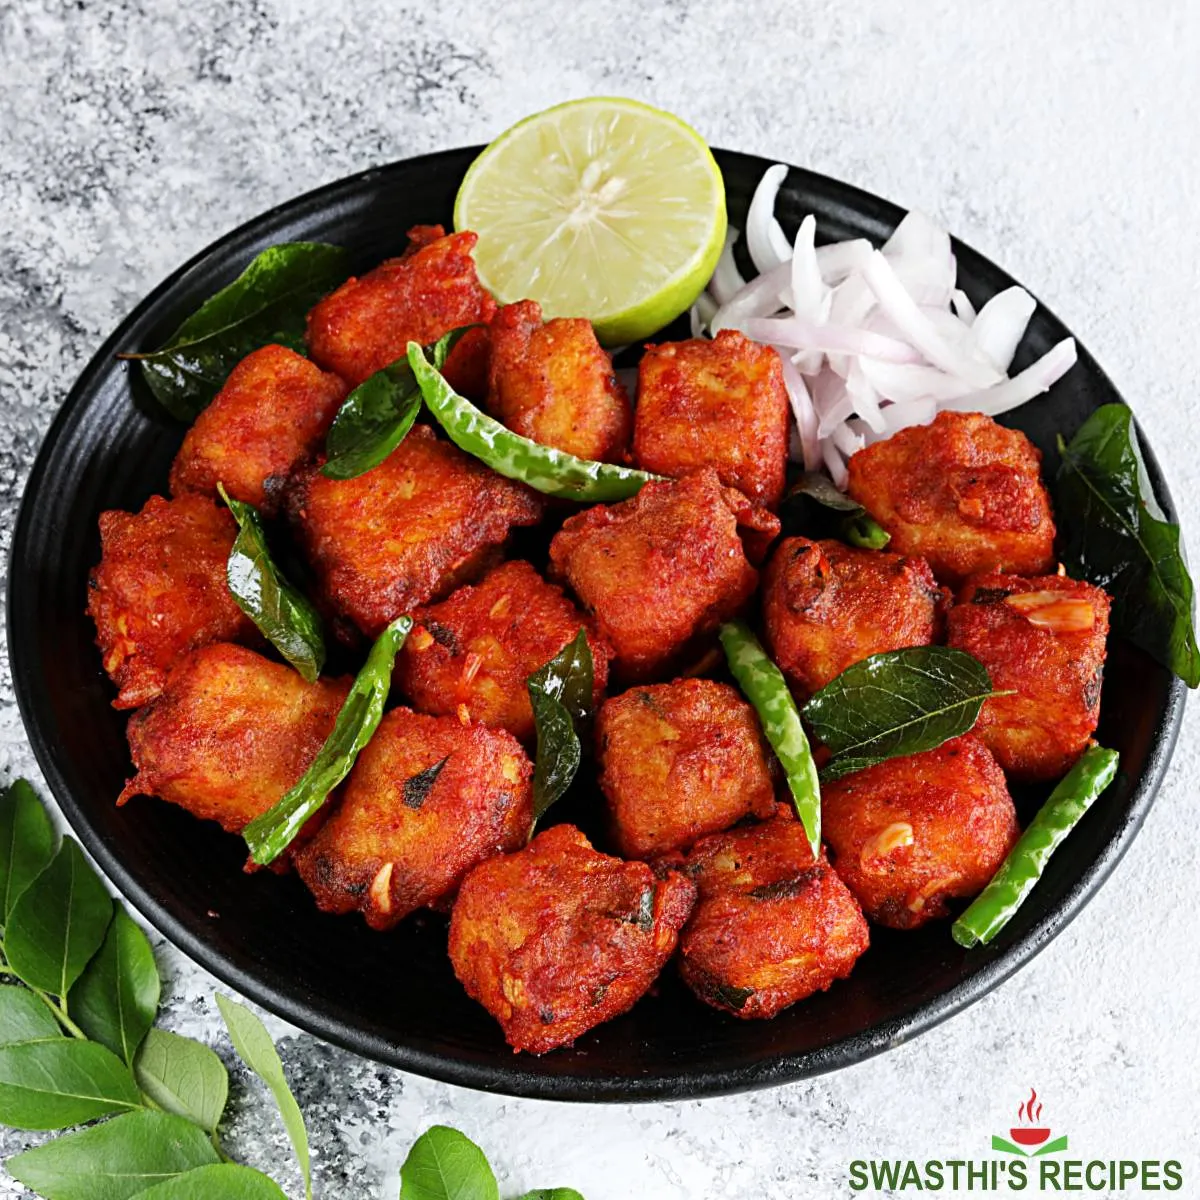 Paneer 65 fry recipe made with paneer, flour and spices